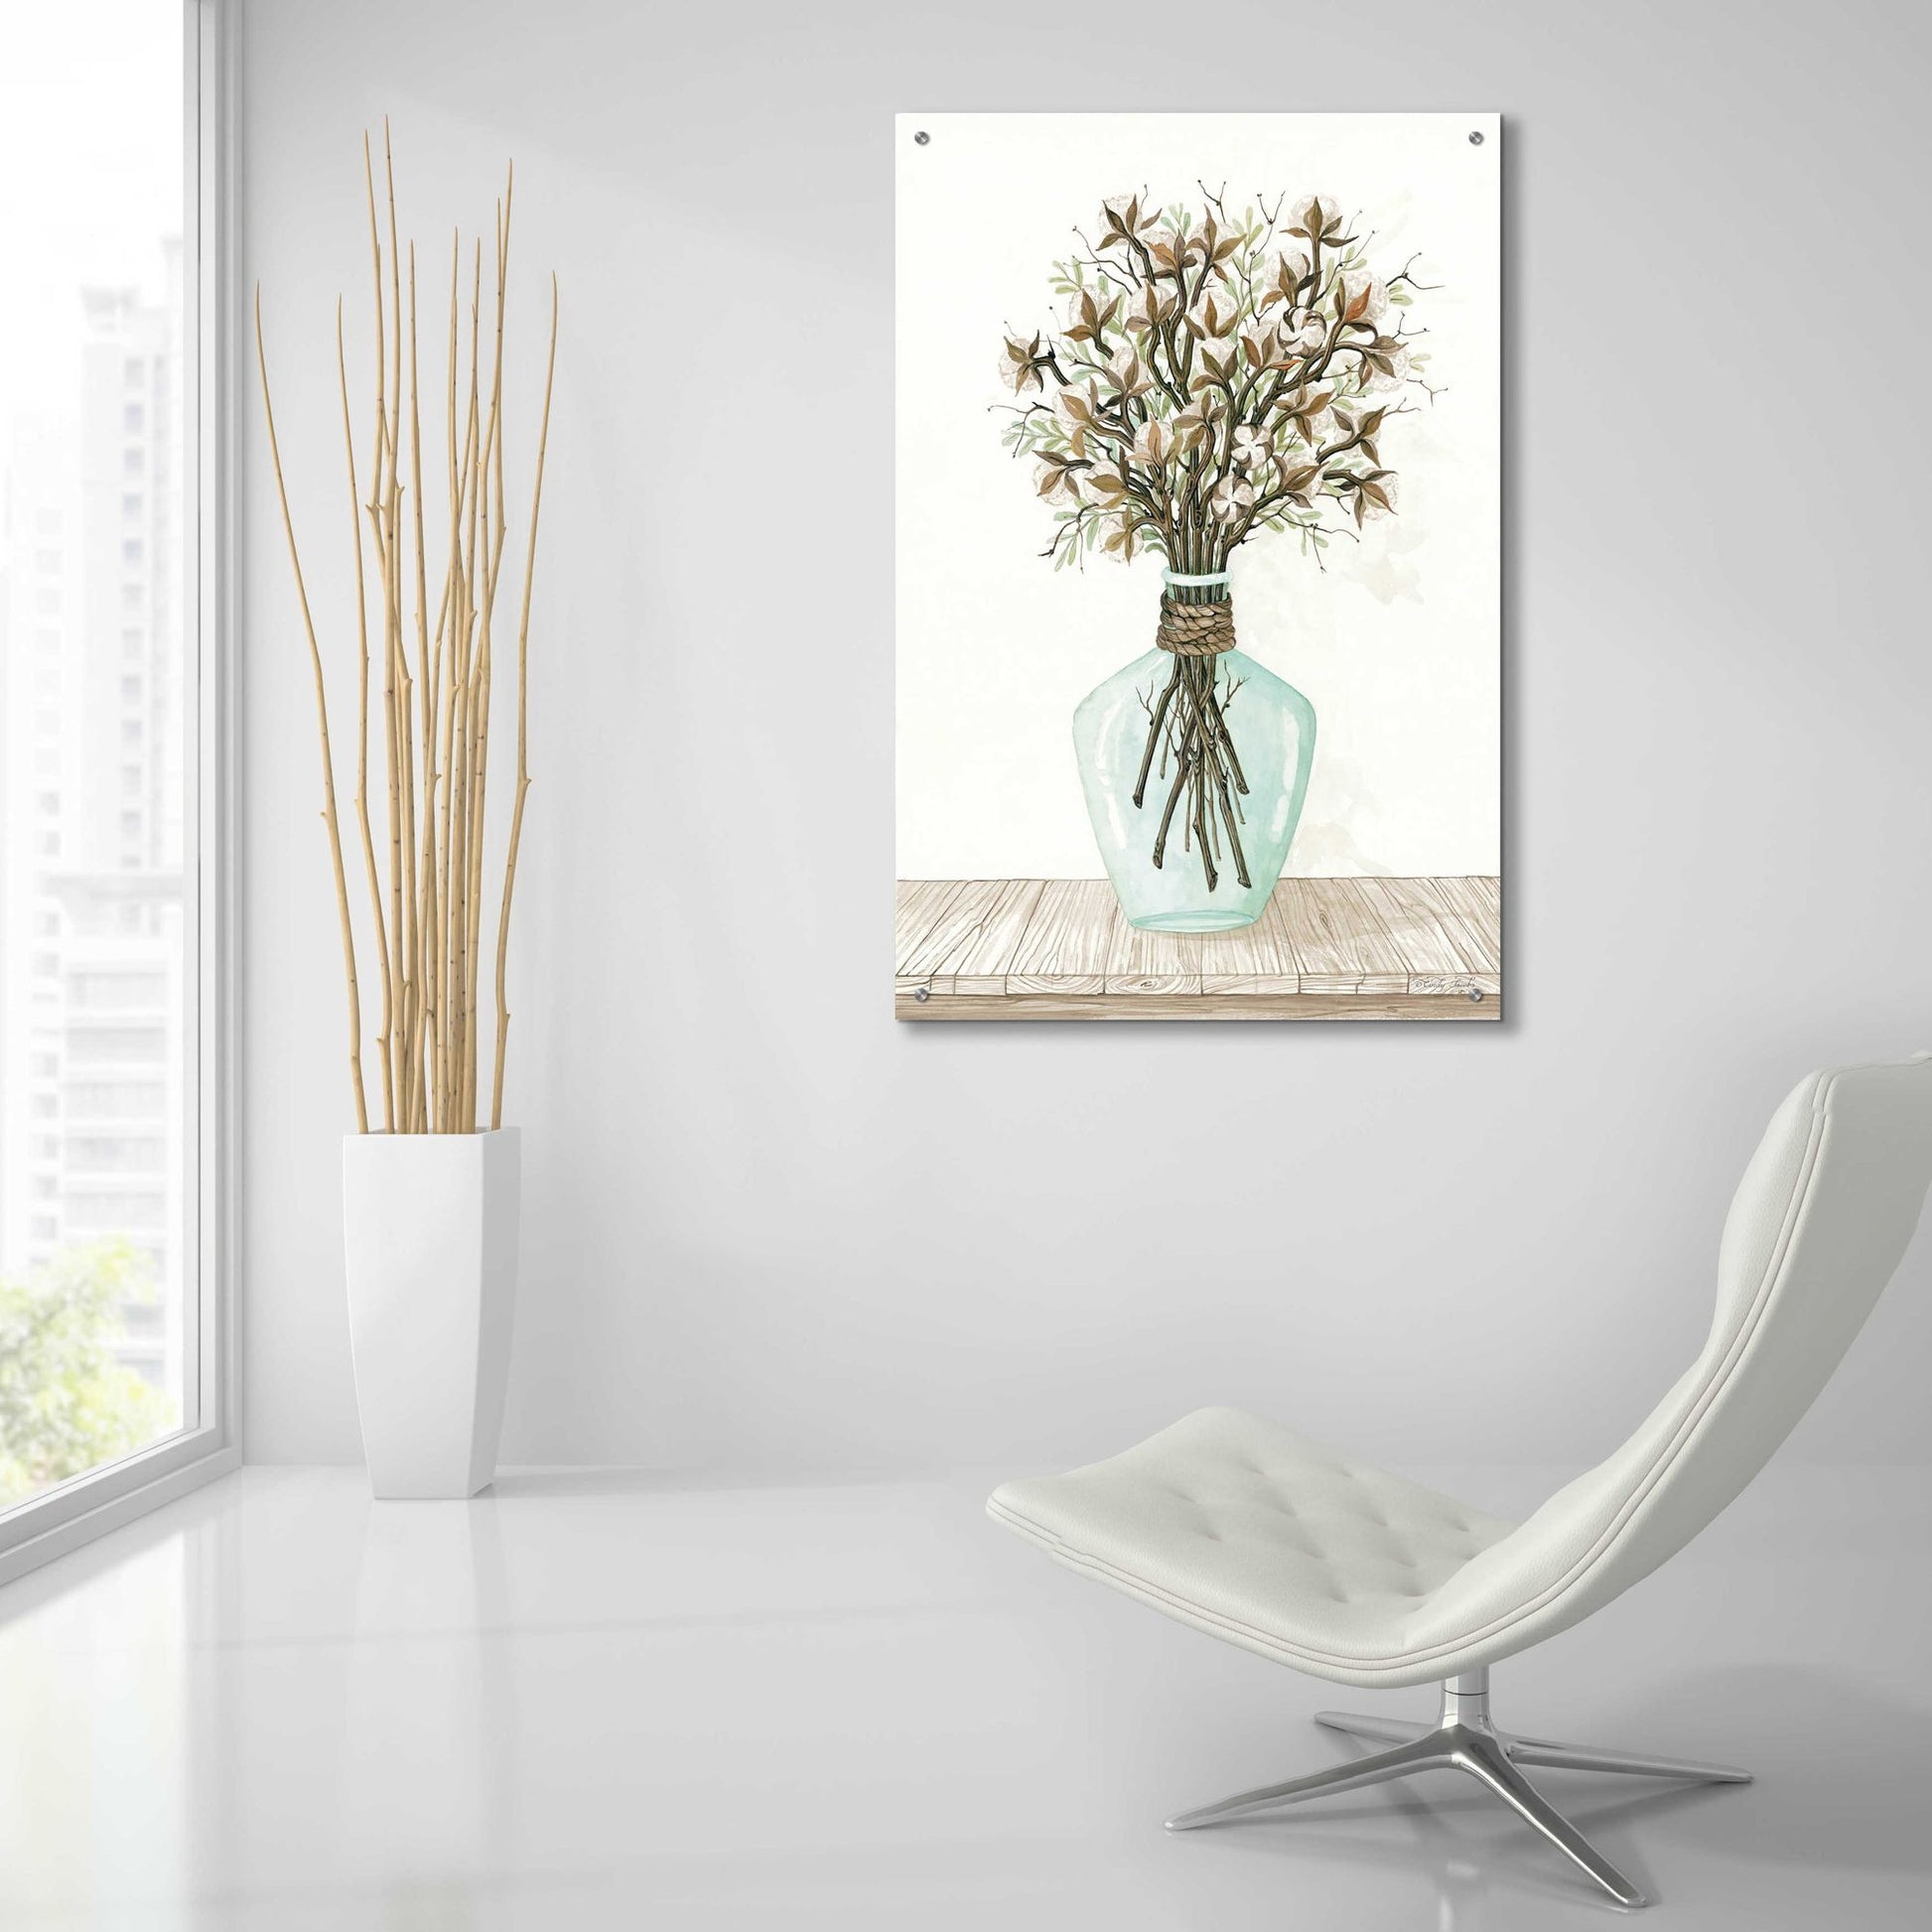 Epic Art 'Cotton Bouquet' by Cindy Jacobs, Acrylic Glass Wall Art,24x36